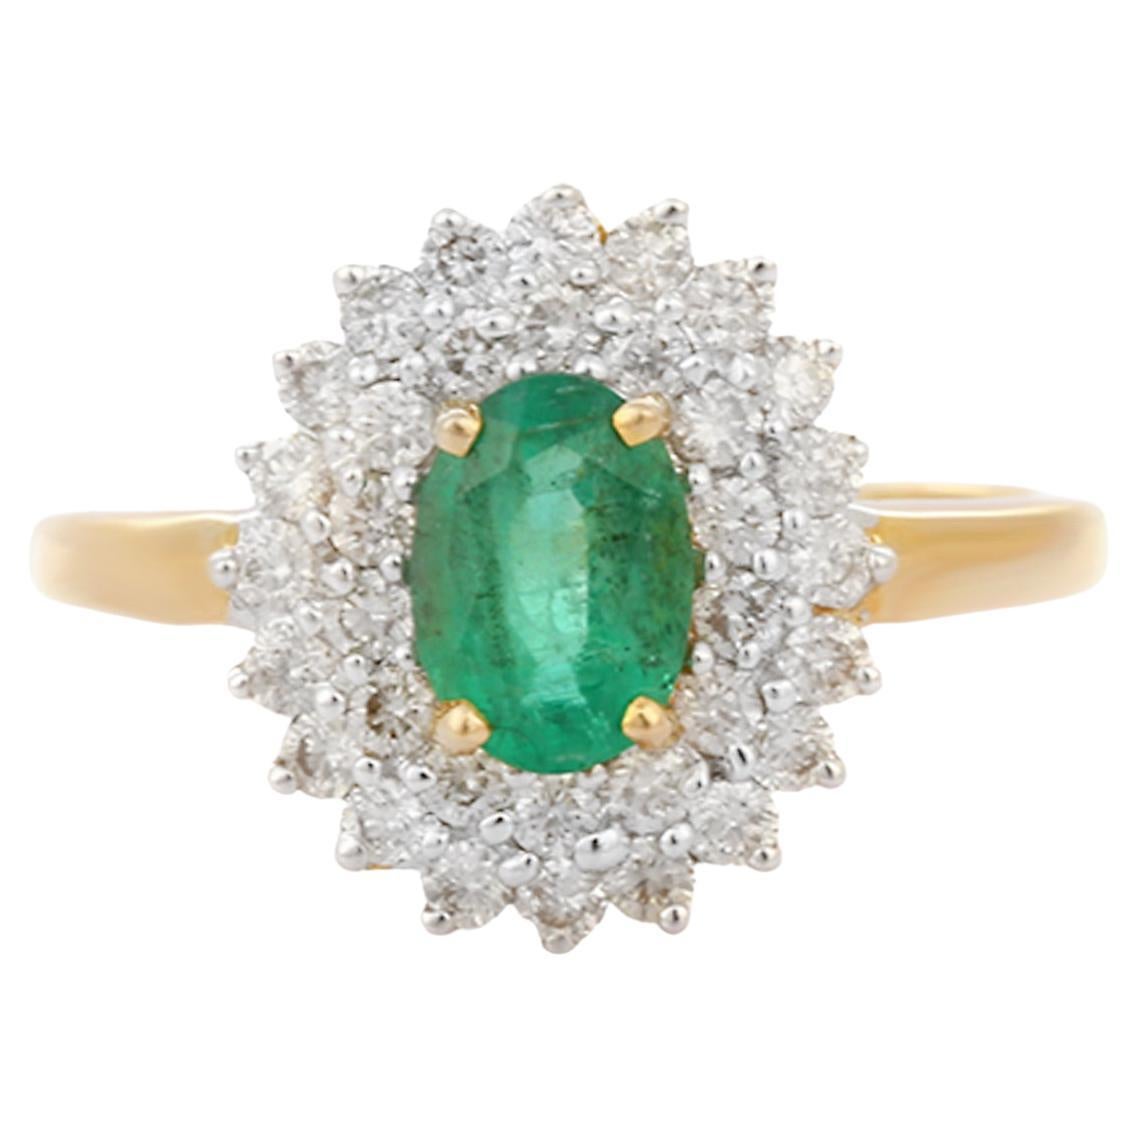 Exquisite 18K Yellow Gold Emerald Halo Diamond Engagement Wedding Ring for Her